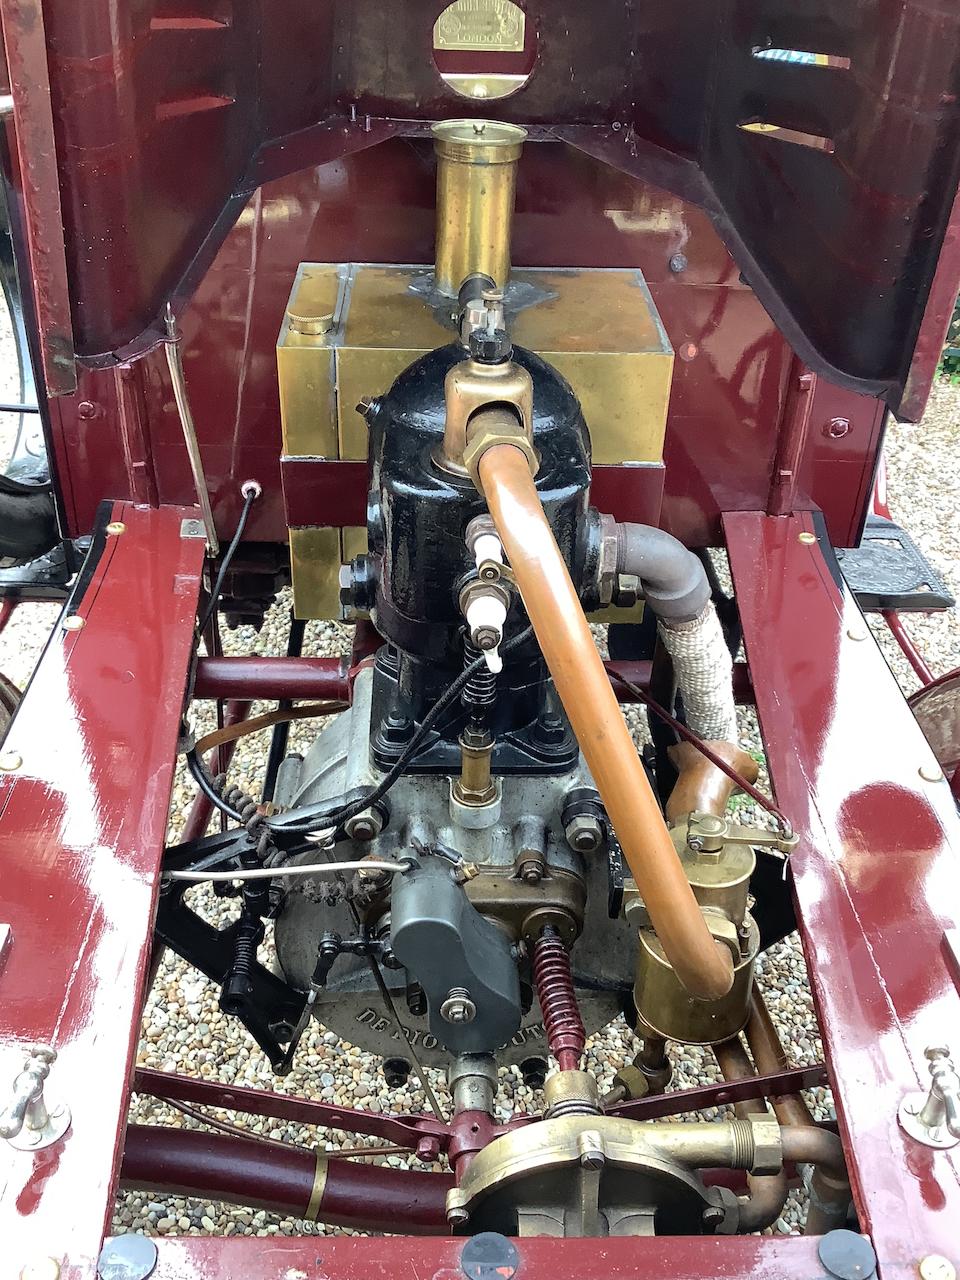 Ex-Sword Collection,1907 De Dion Bouton Type AL 8hp Two-Seater with Spider  Chassis no. 714 Engine no. 20711